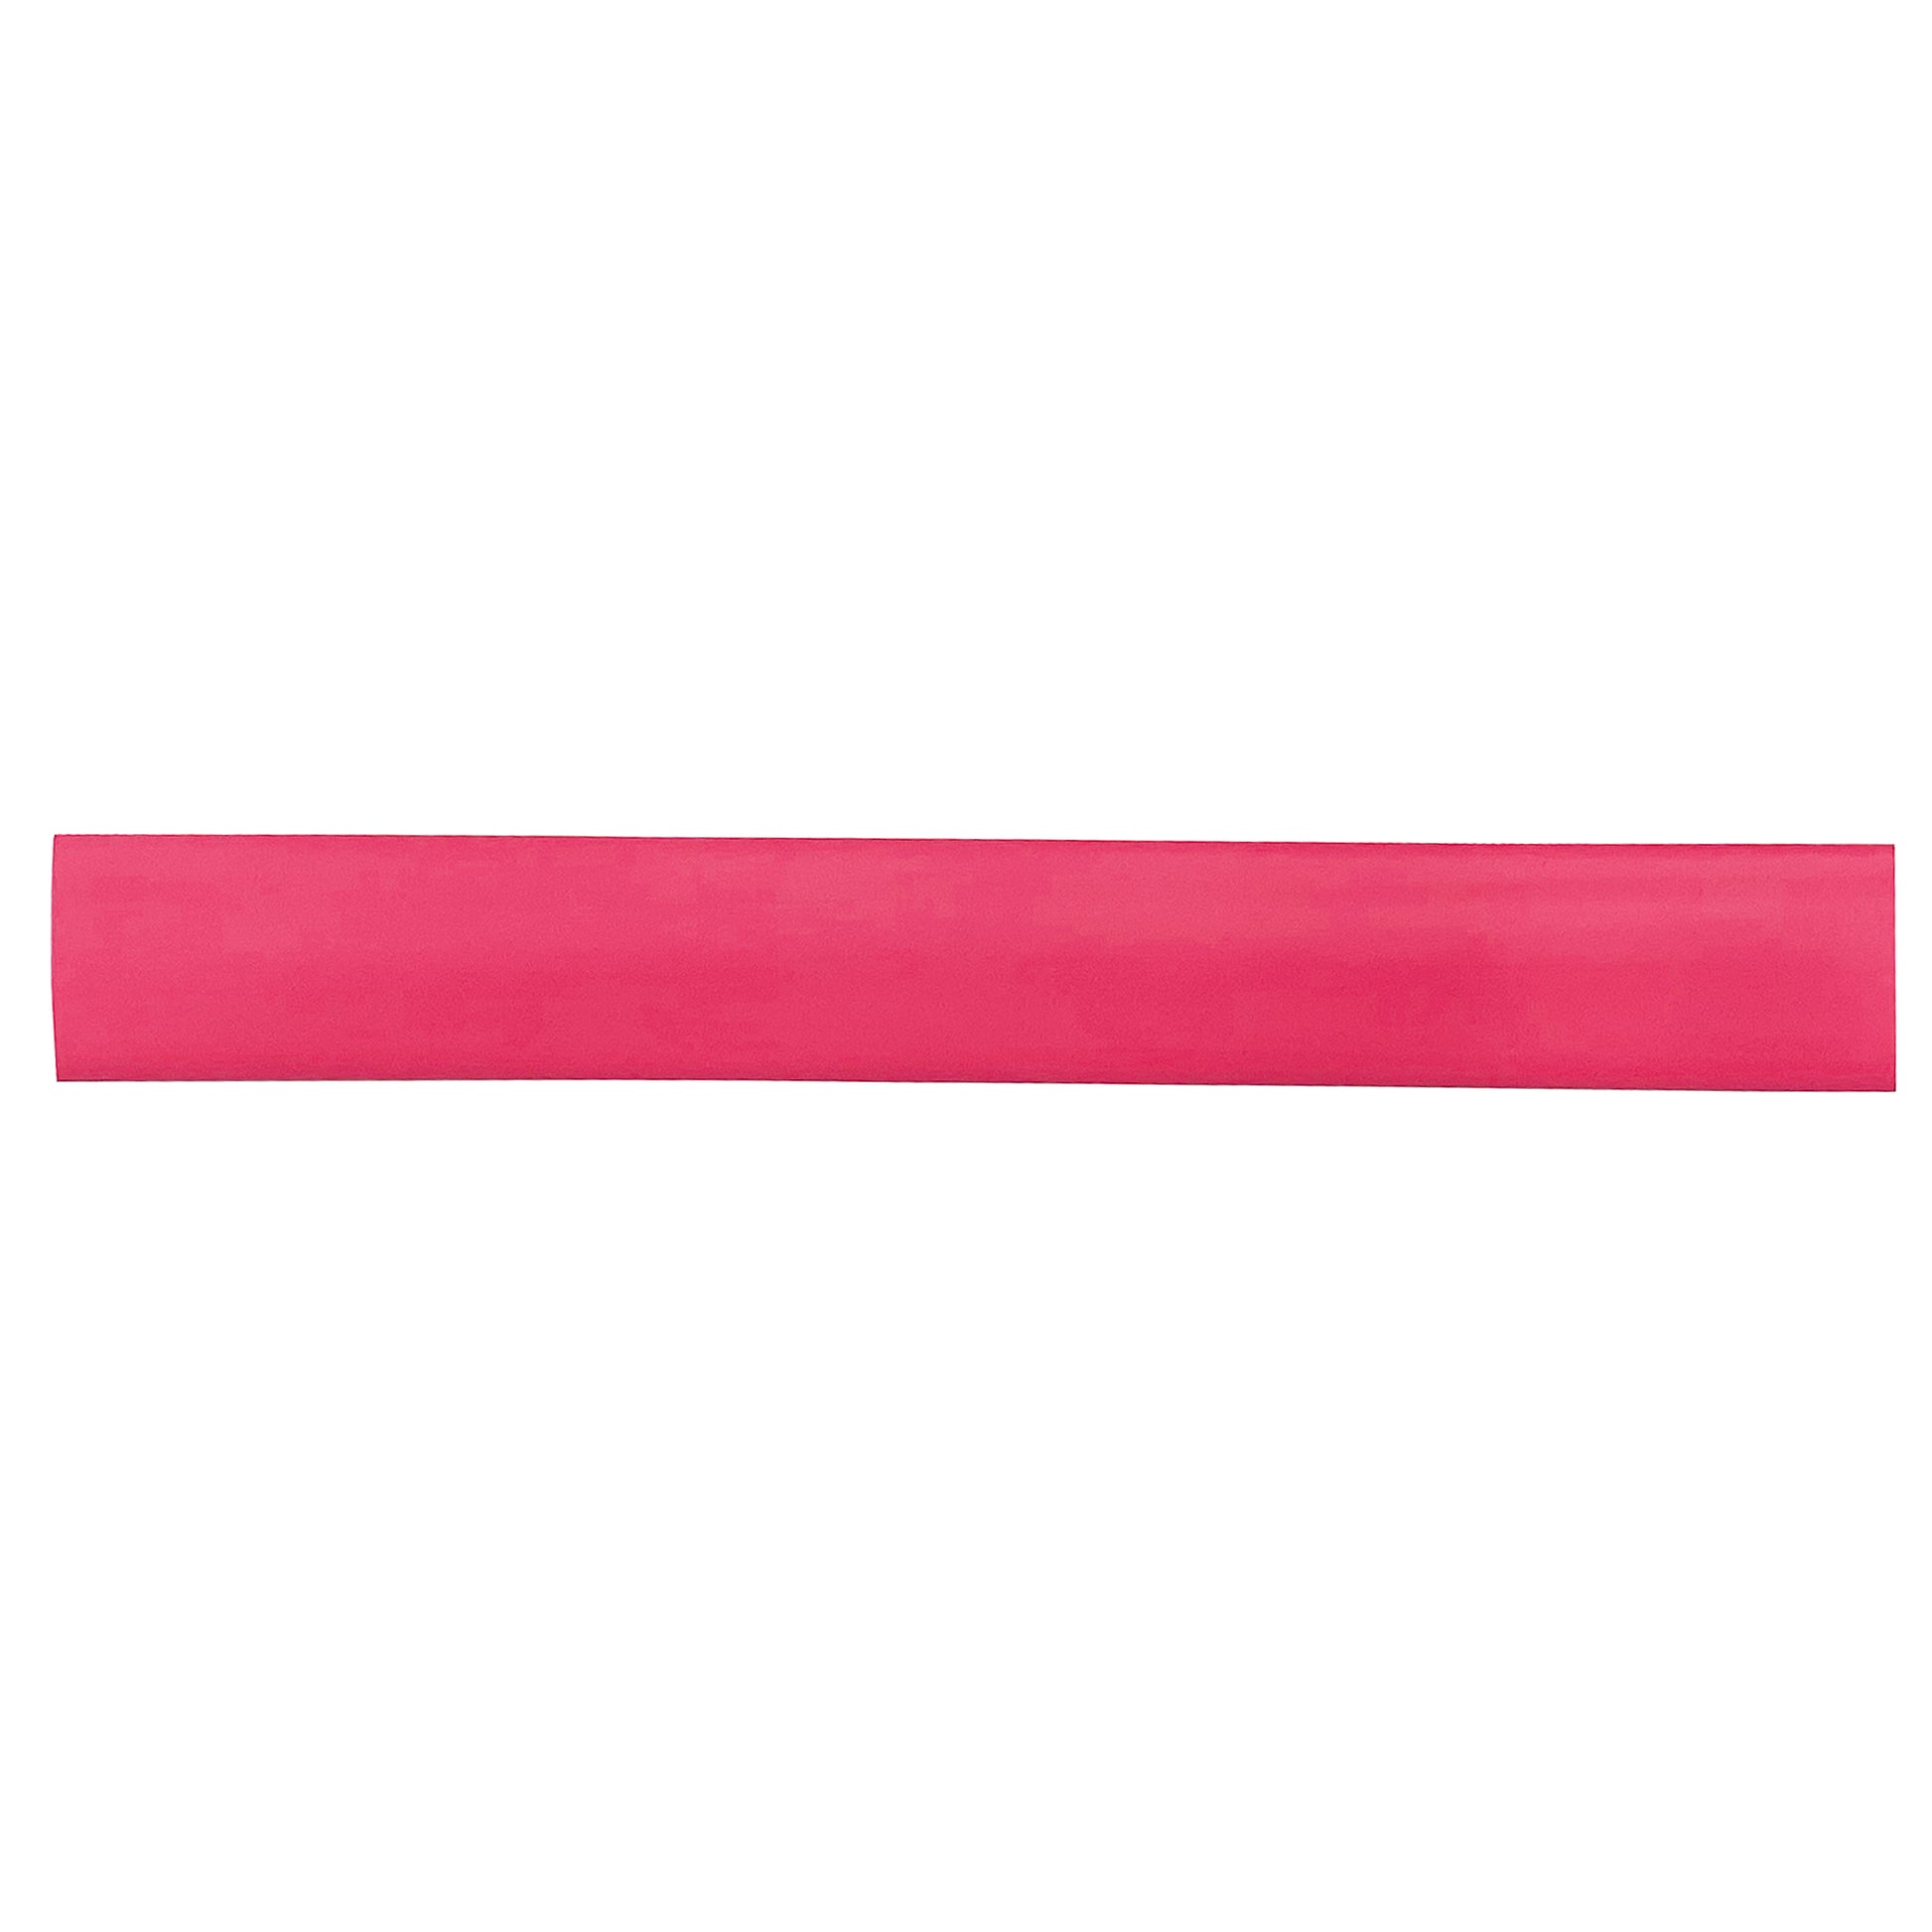 Flexible Thin Single Wall Non-Adhesive Heat Shrink Tubing 2:1 Red 1/2" ID - 48" Inch 4 Pack